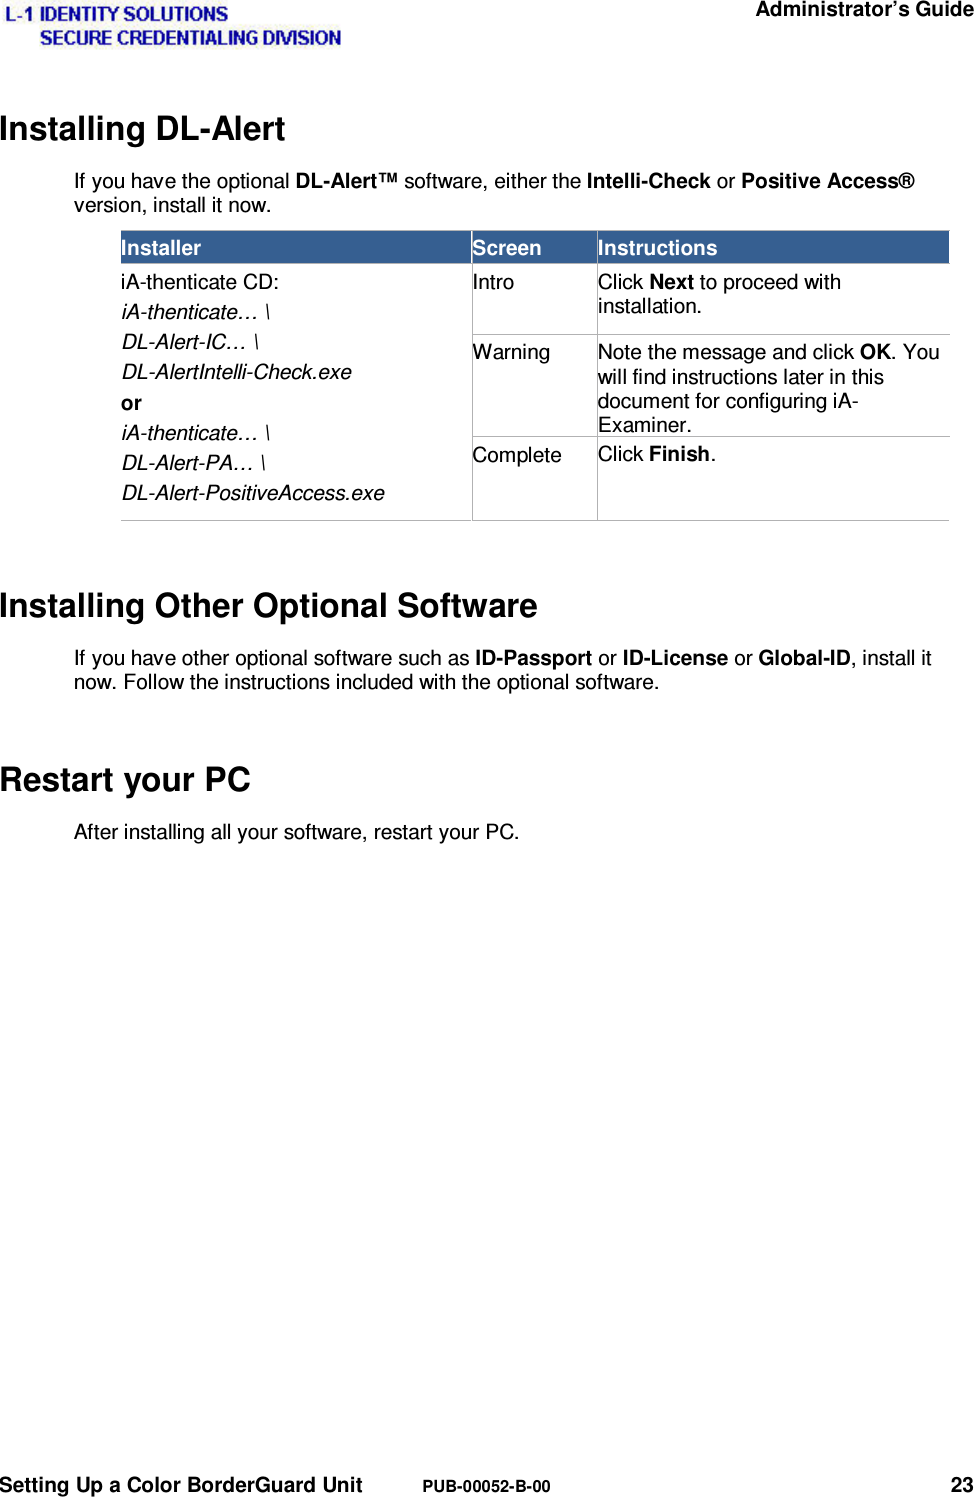   Administrator’s Guide Setting Up a Color BorderGuard Unit  PUB-00052-B-00 23 Installing DL-Alert If you have the optional DL-Alert™ software, either the Intelli-Check or Positive Access® version, install it now. Installer  Screen  Instructions iA-thenticate CD: iA-thenticate… \ DL-Alert-IC… \ DL-AlertIntelli-Check.exe or iA-thenticate… \ DL-Alert-PA… \ DL-Alert-PositiveAccess.exe Intro Click Next to proceed with installation. Warning  Note the message and click OK. You will find instructions later in this document for configuring iA-Examiner.Complete  Click Finish. Installing Other Optional Software If you have other optional software such as ID-Passport or ID-License or Global-ID, install it now. Follow the instructions included with the optional software. Restart your PC After installing all your software, restart your PC. 